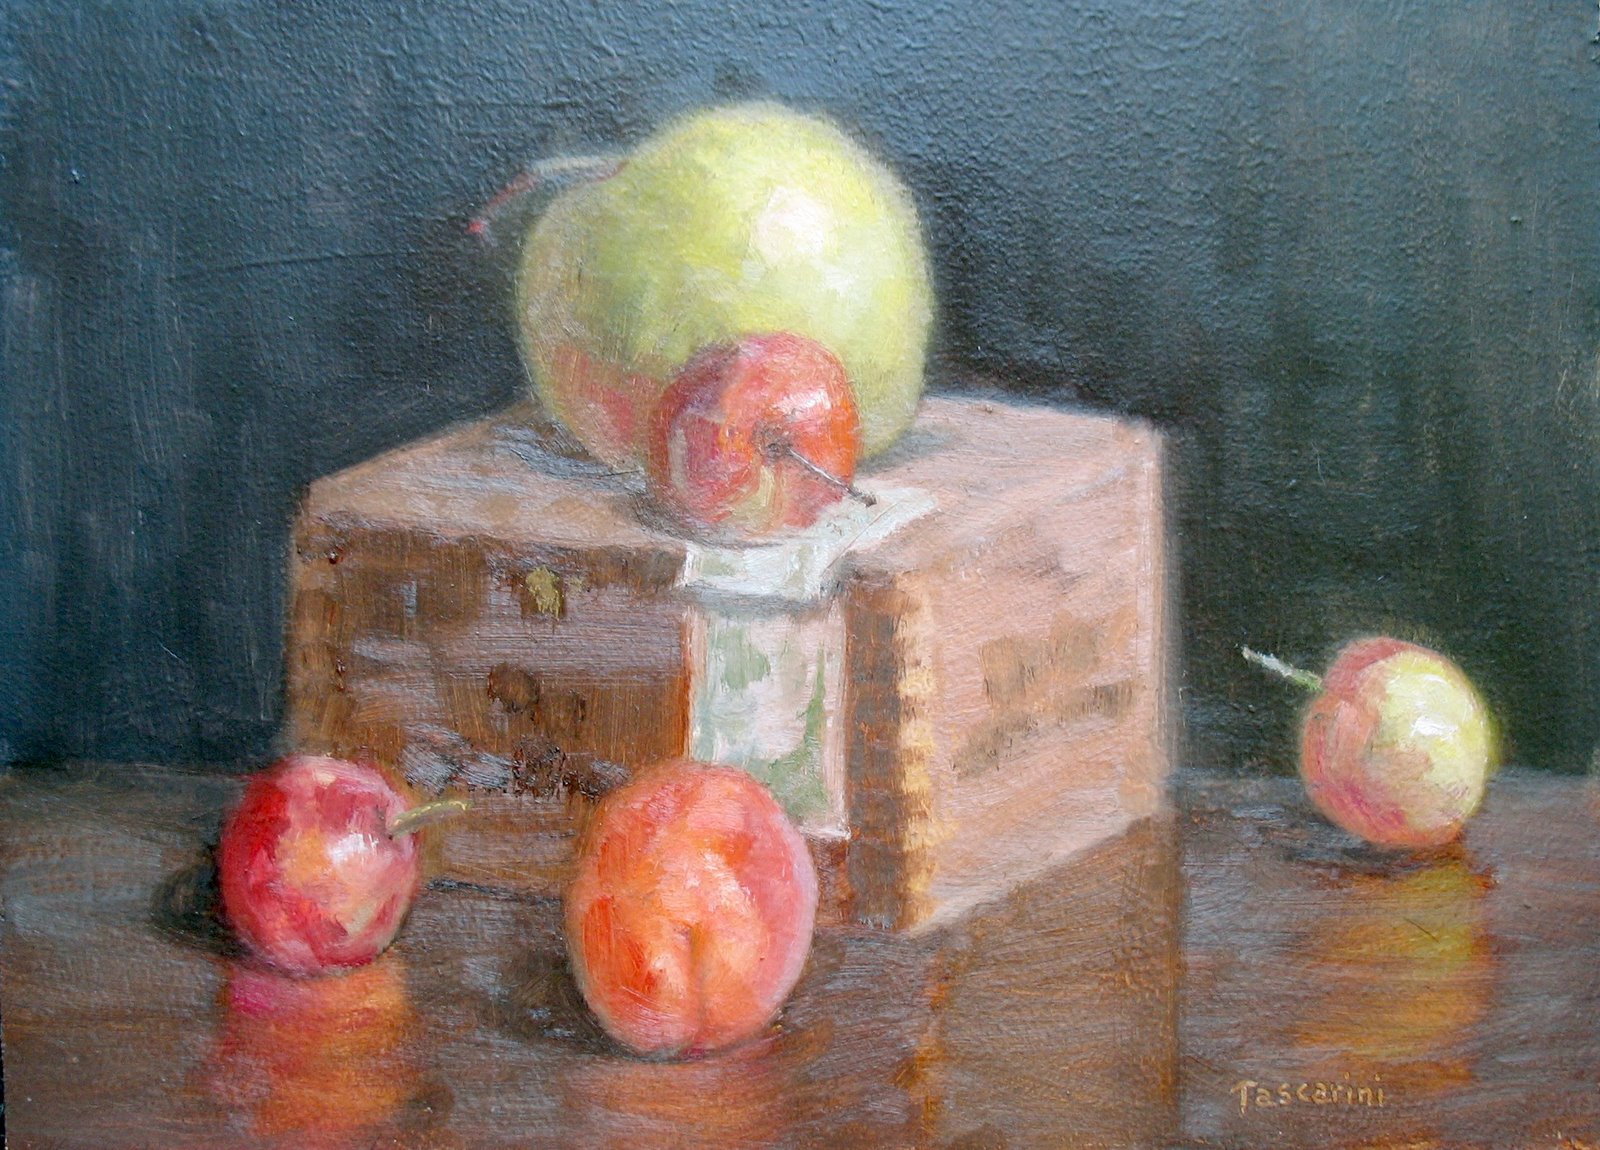 [When+an+Apple,+an+Apricot+and+Plums+get+together...jpg]